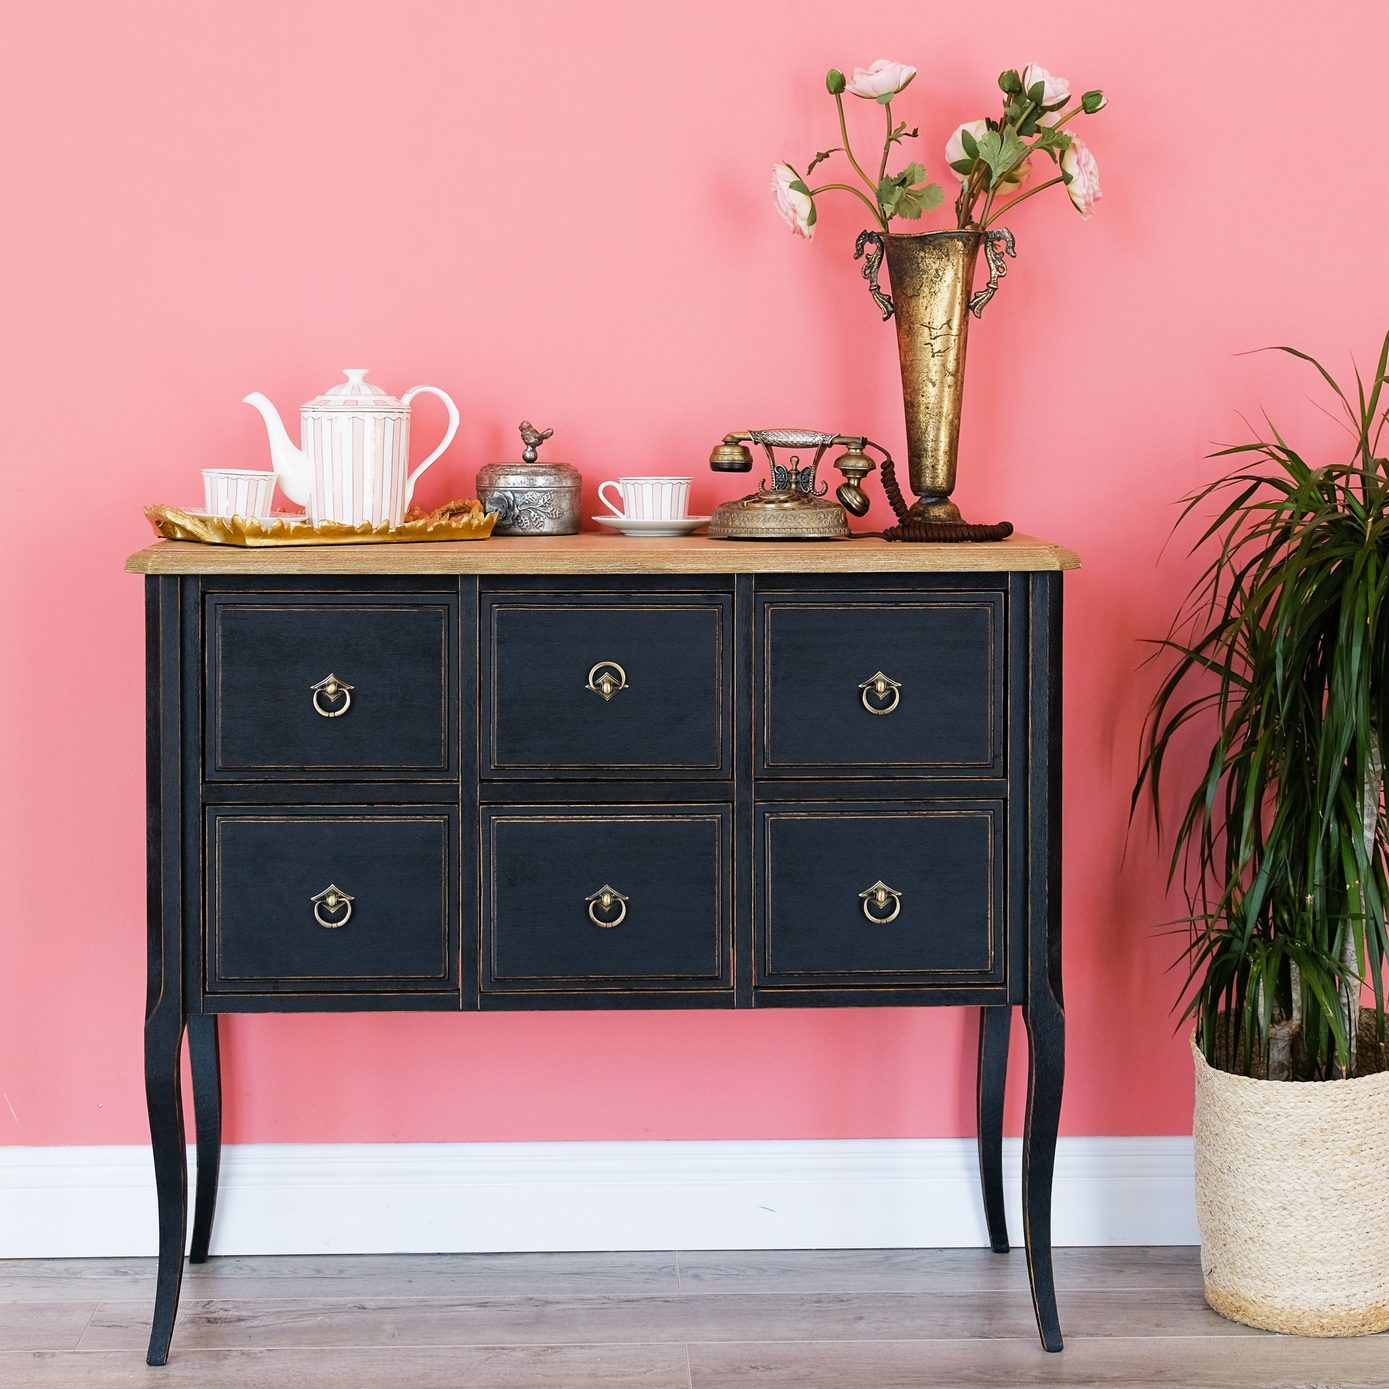 Old chest of drawers with objects on the background of a pink wall. Next is a flower in a pot